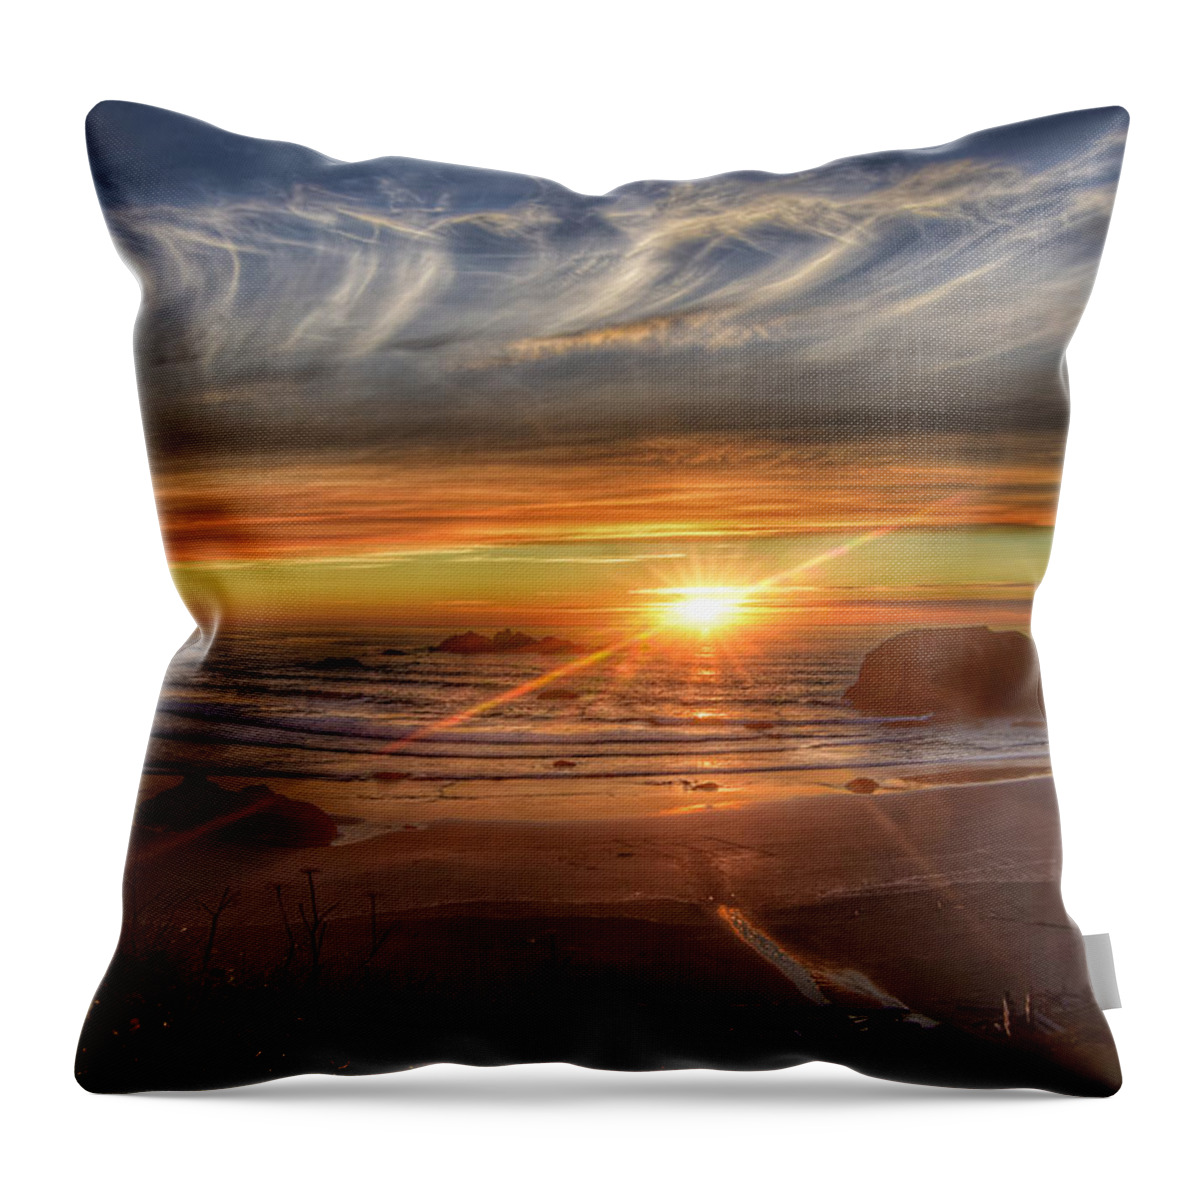 Bandon-oregon Throw Pillow featuring the photograph Bandon Sunset by Bonnie Bruno